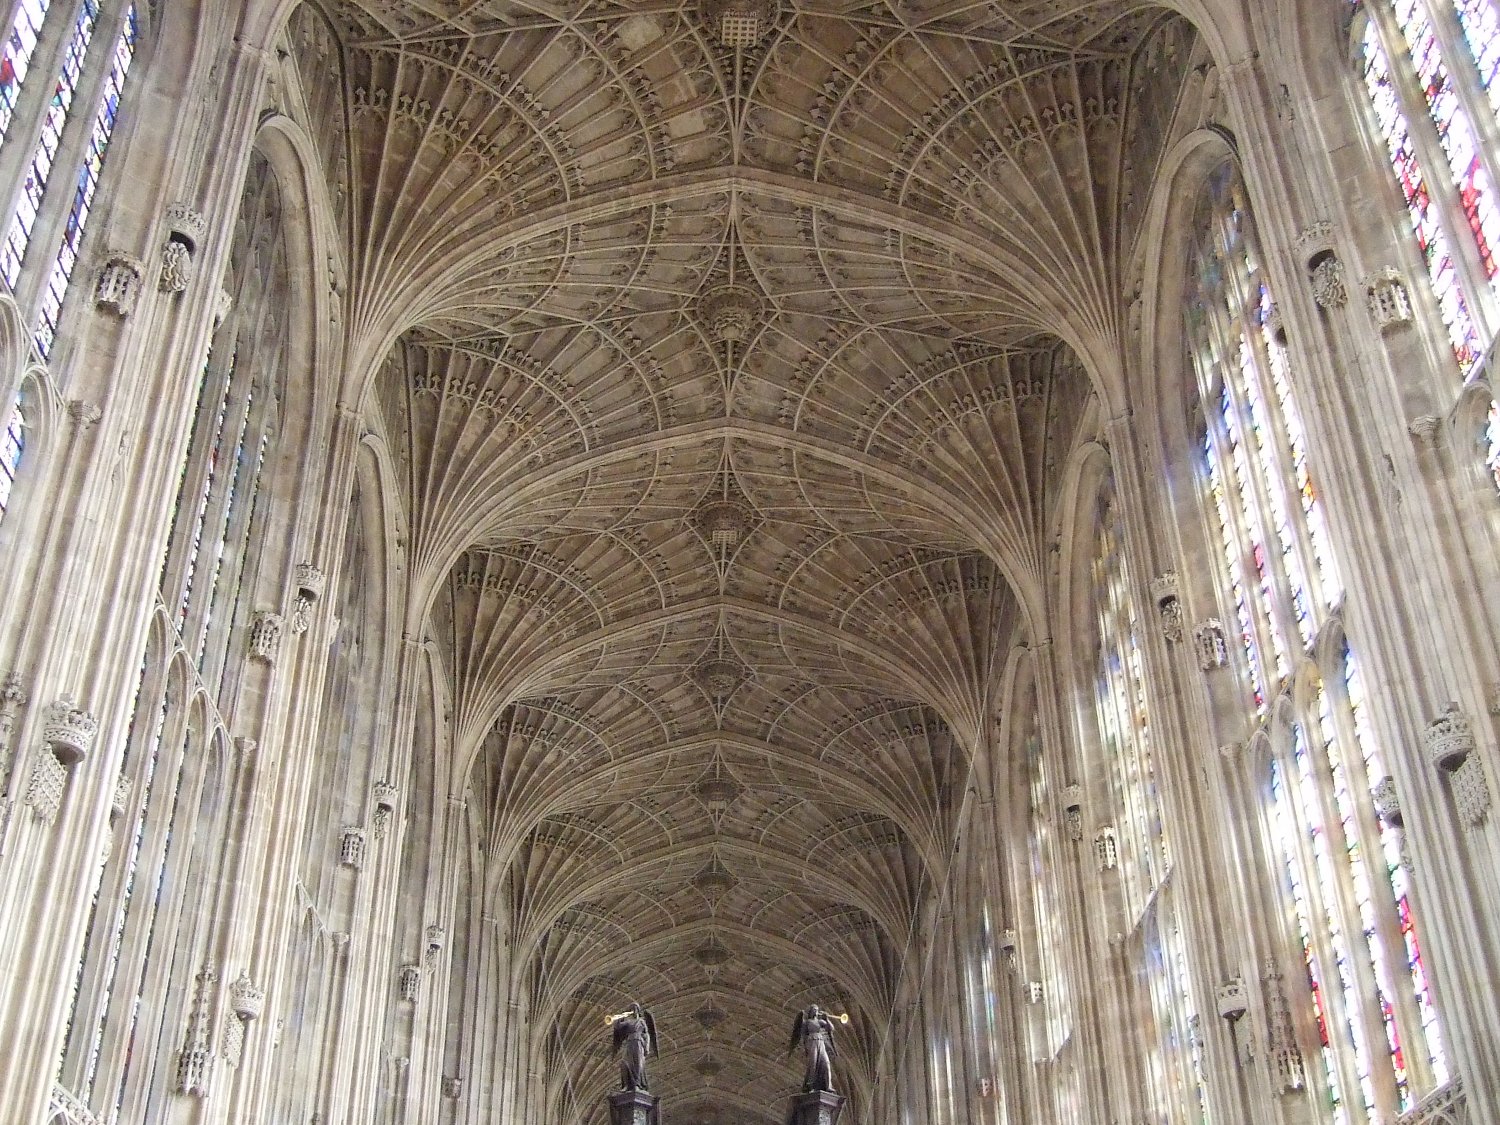 Roof of Kings College Chapel